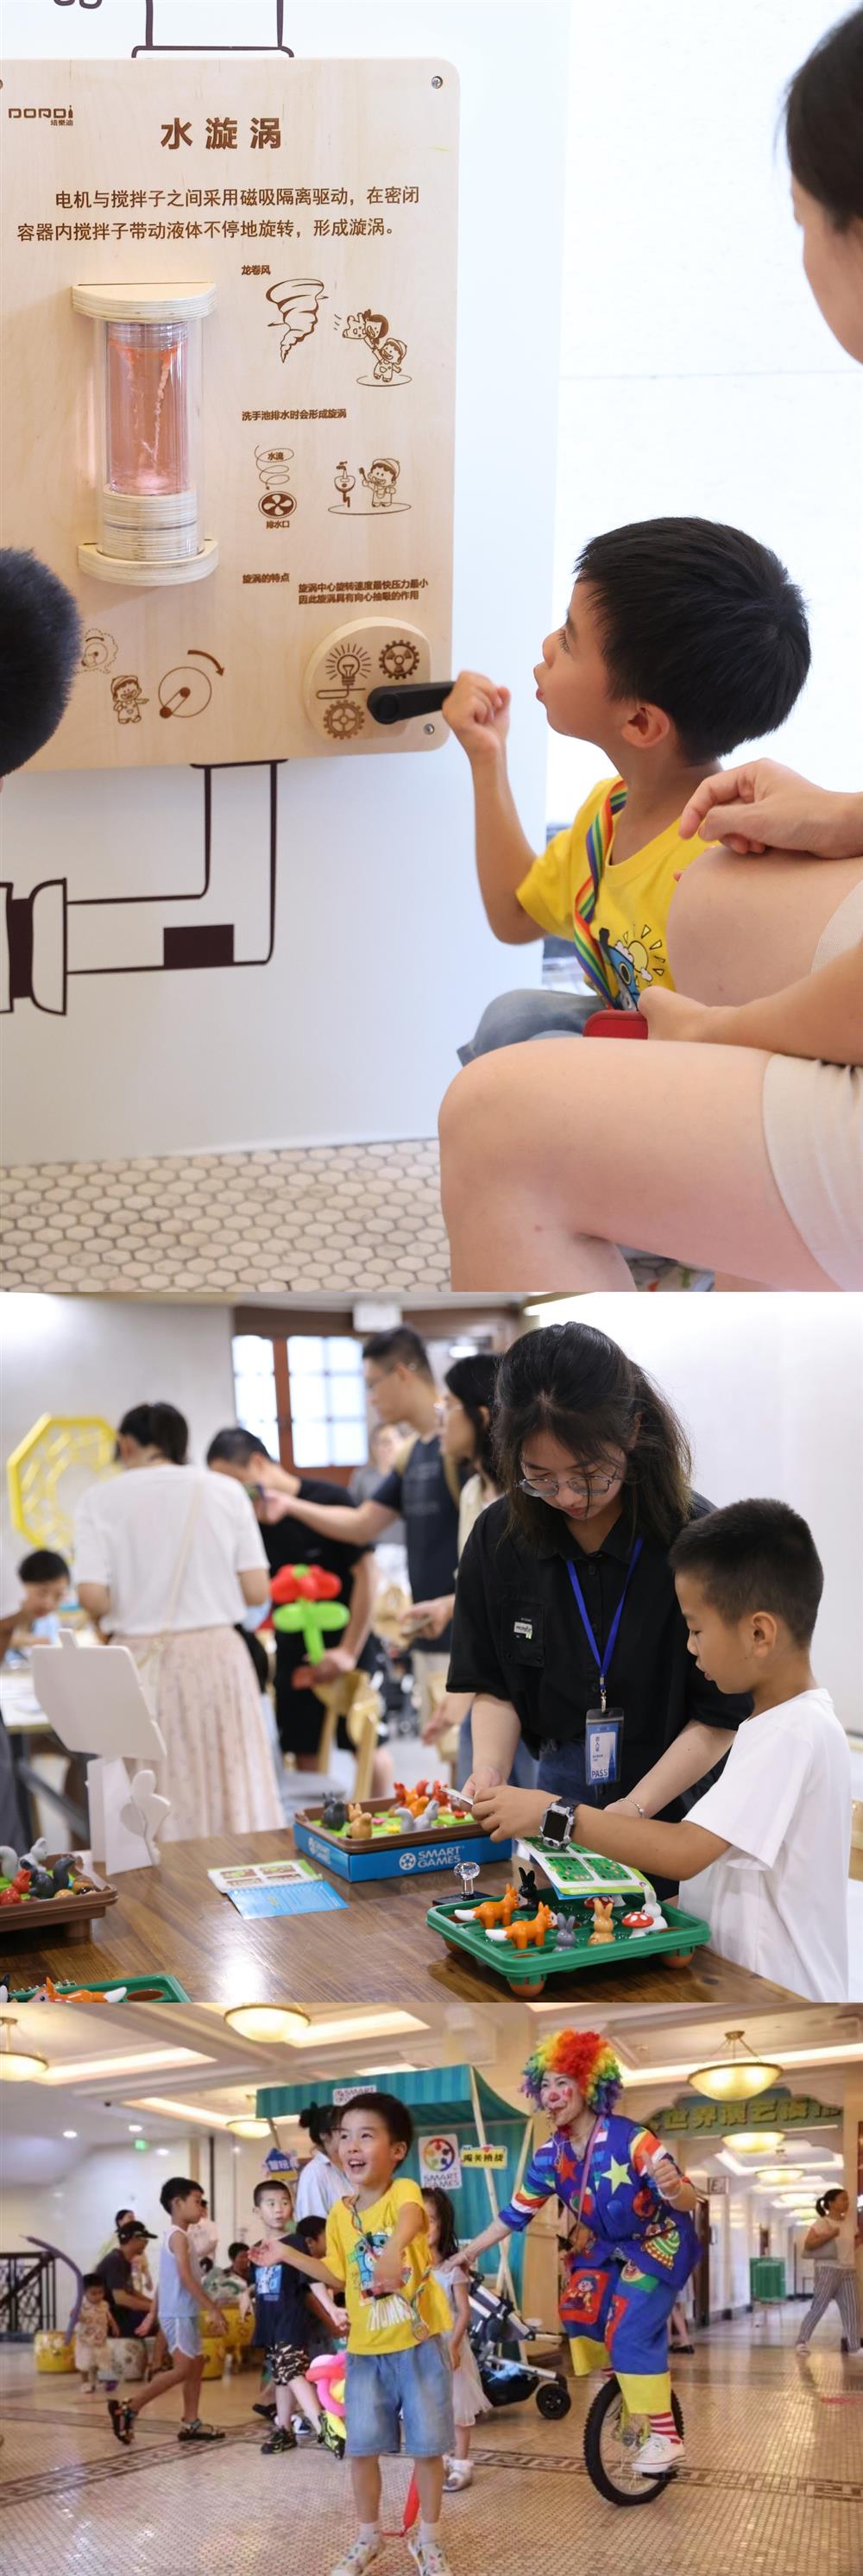 "Performance+Consumption+Activities" one-stop stroll for children, Shanghai World Parent Child Performance Season and Intangible Cultural Heritage Parent Child Festival Opening World | Installation | Activities